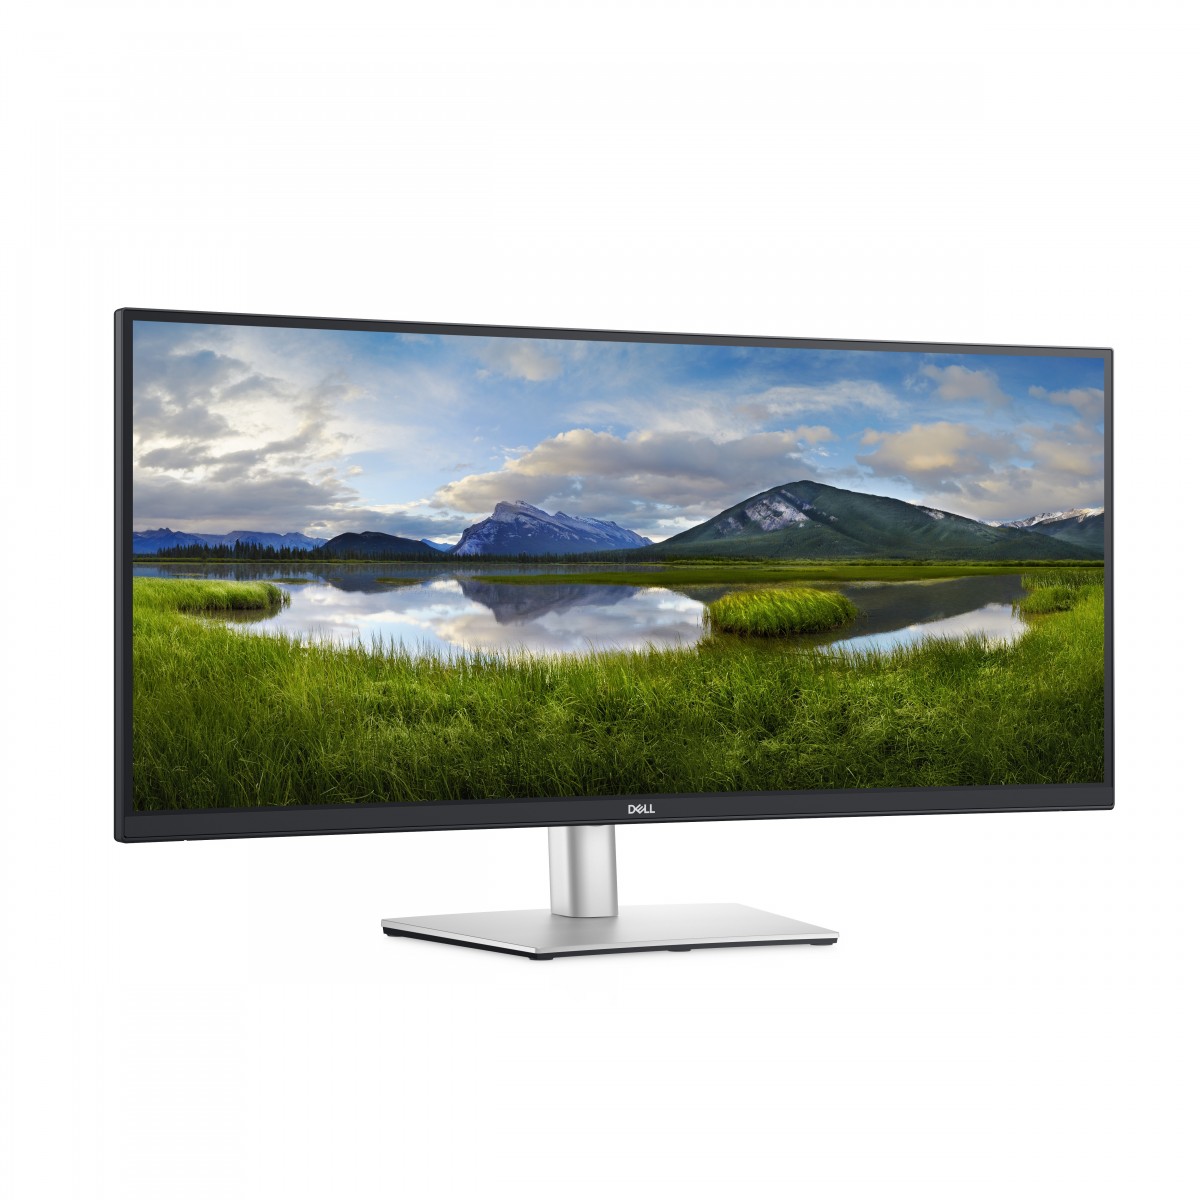 Dell TFT P3421W 86.5IN IPS WHITE - Flat Screen - IPS